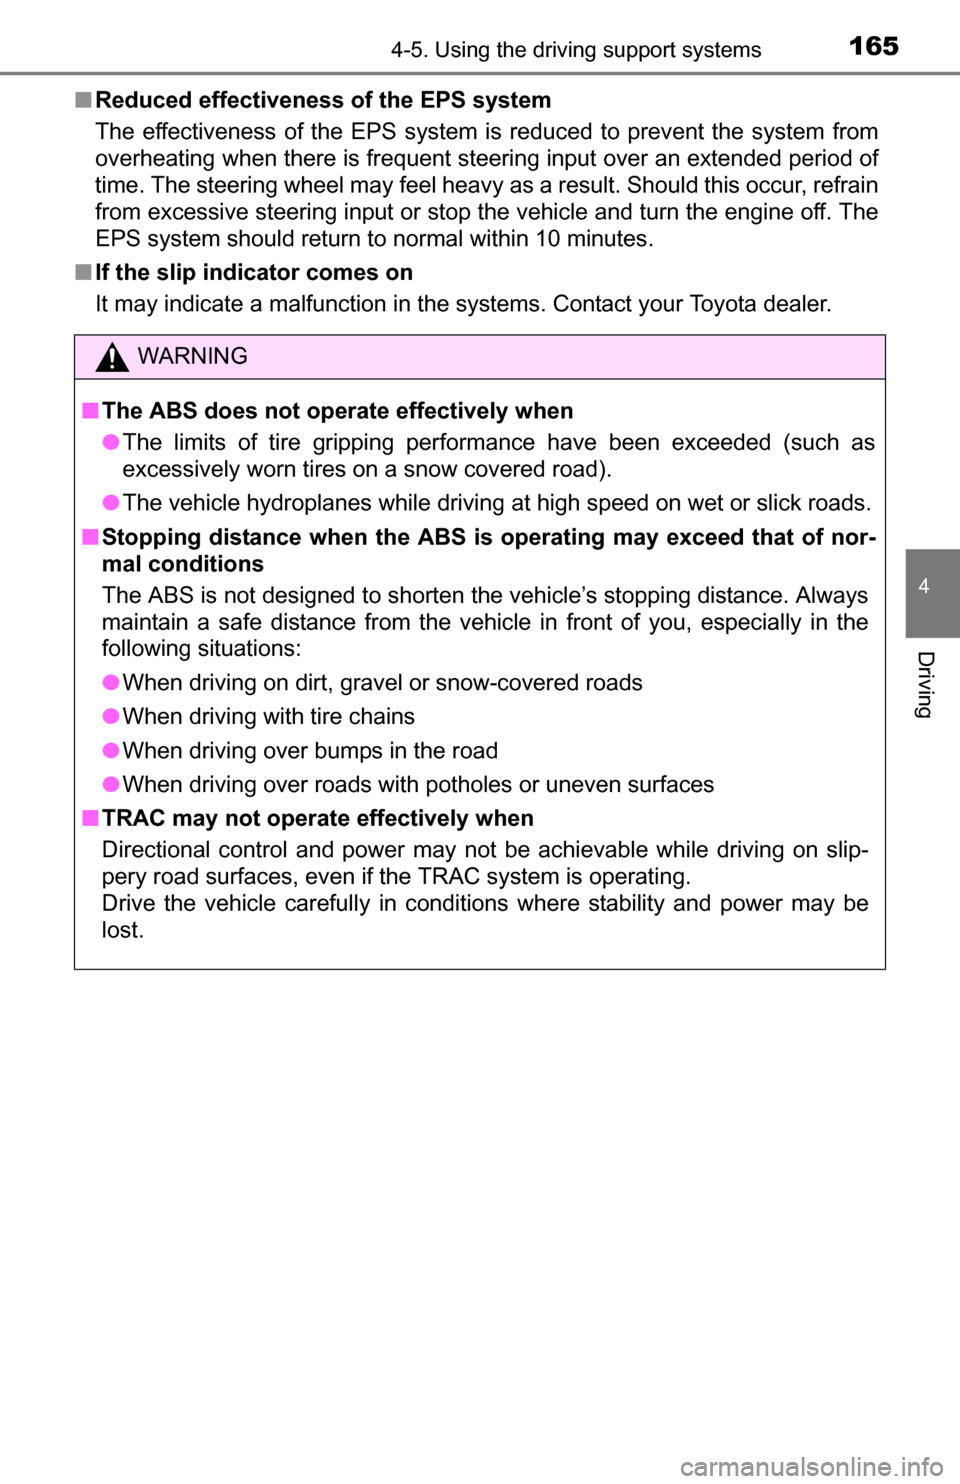 TOYOTA YARIS 2016 3.G User Guide 1654-5. Using the driving support systems
4
Driving
■Reduced effectiveness of the EPS system
The effectiveness of the EPS system is reduced to prevent the system from
overheating when there is frequ